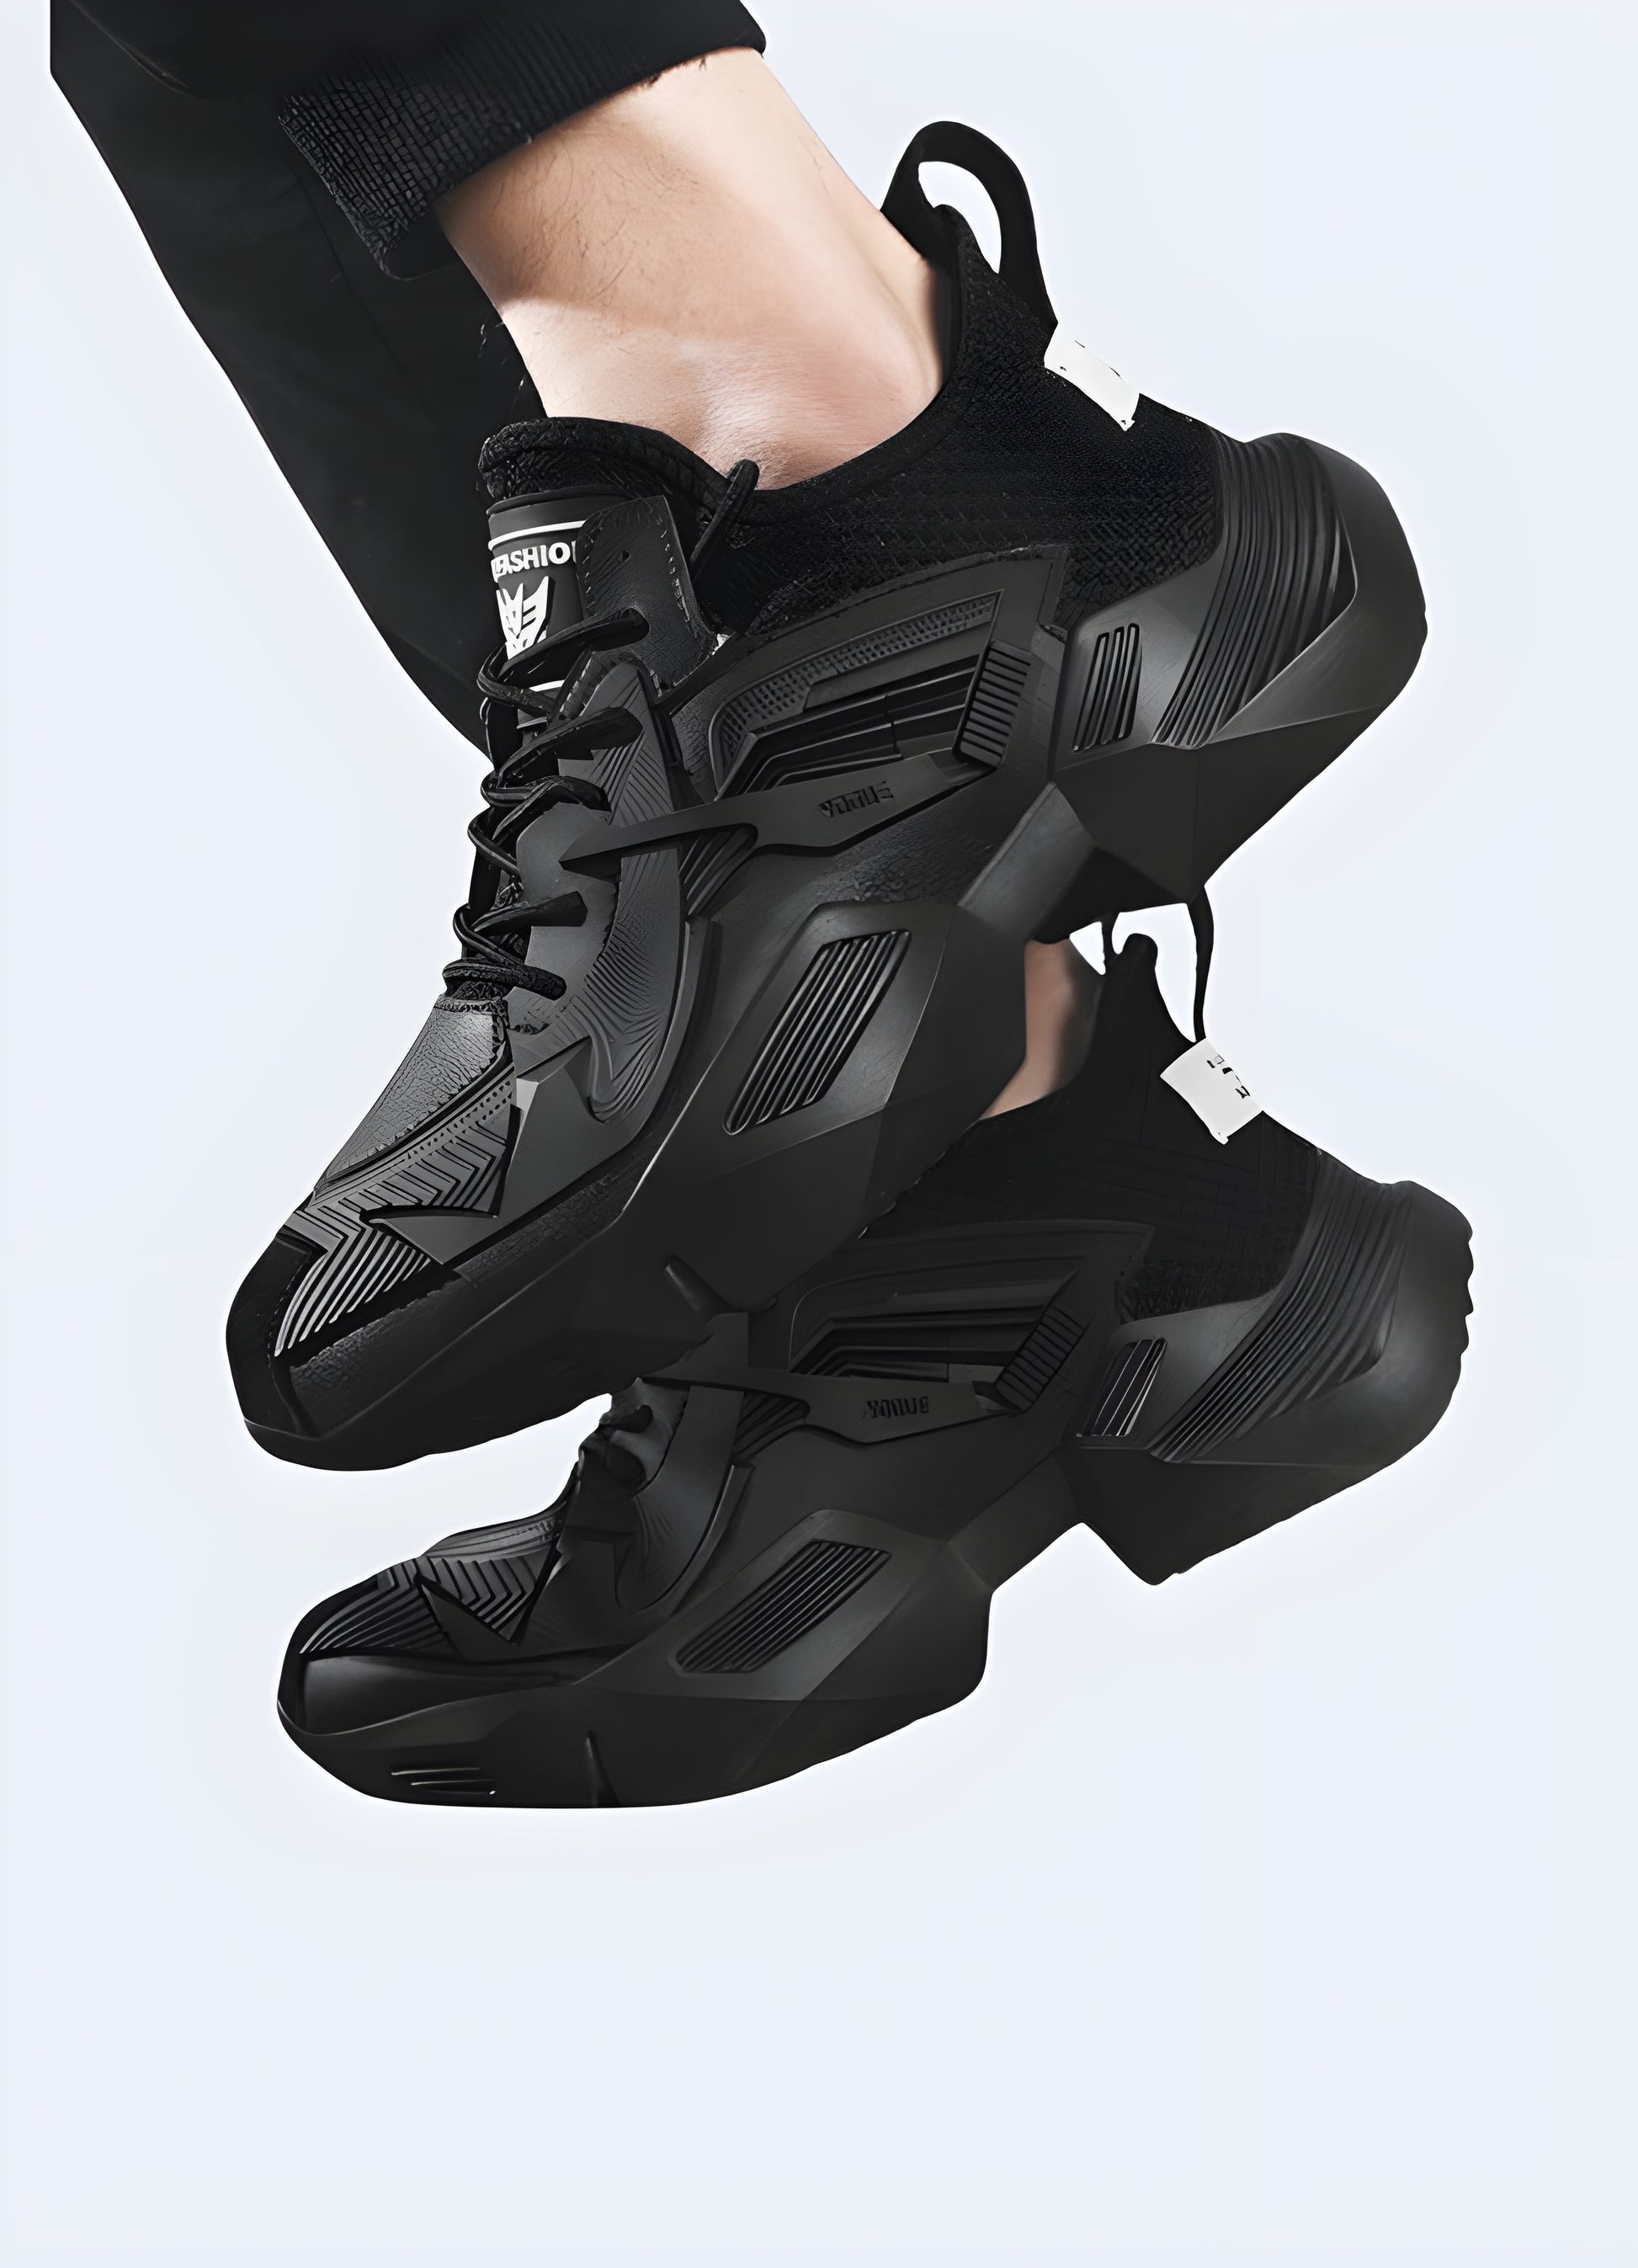 Toggle lace-up closure black streetwear sneakers.